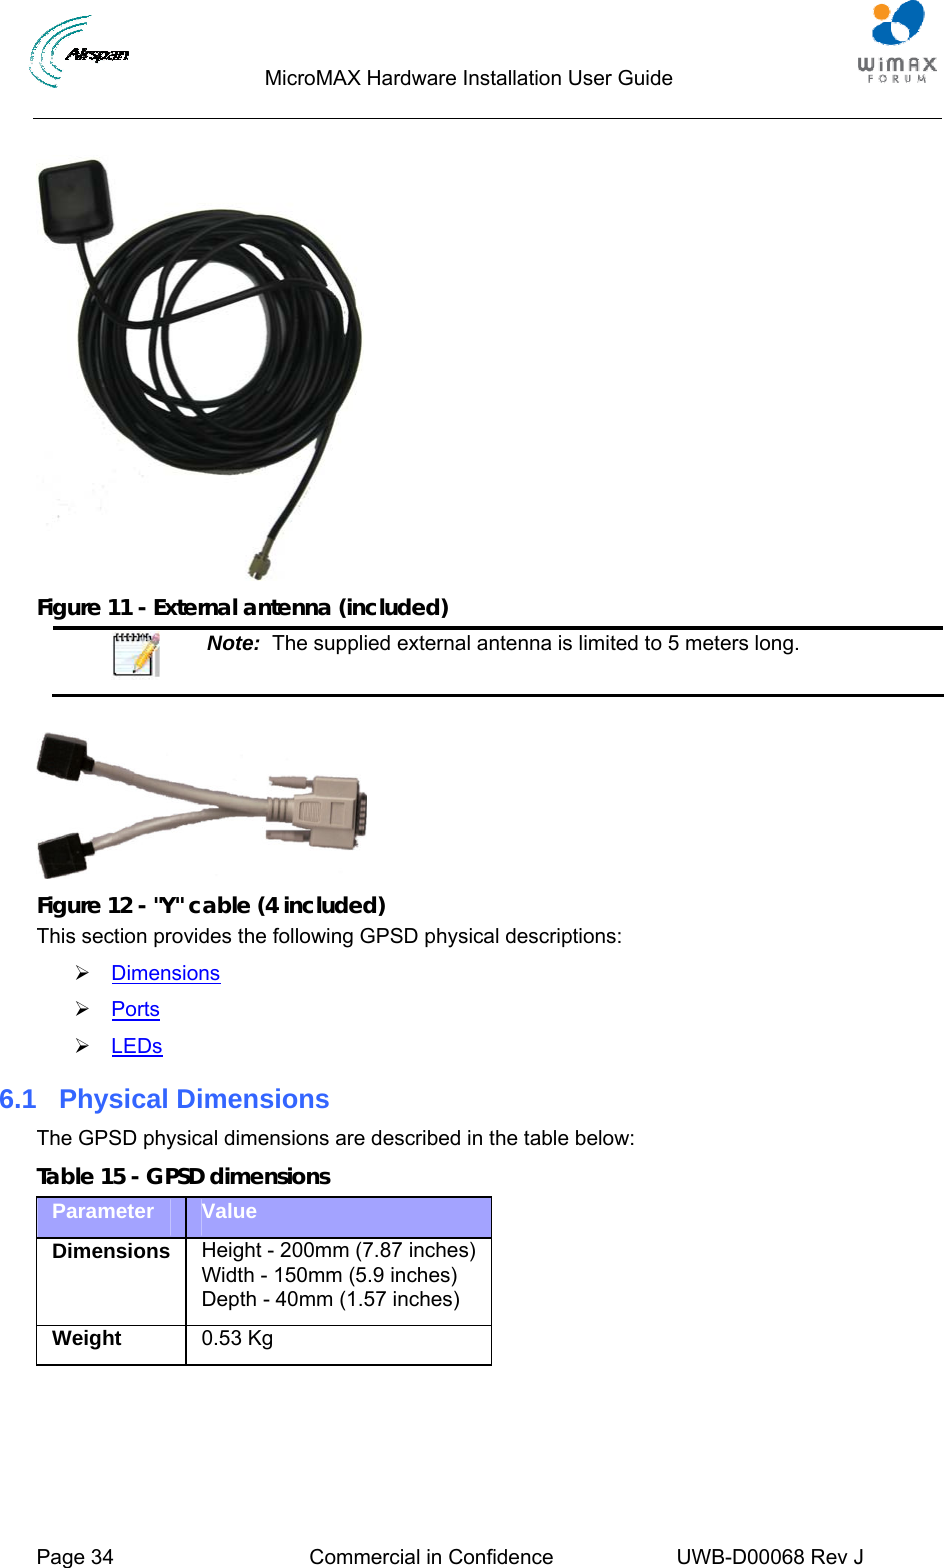                                  MicroMAX Hardware Installation User Guide     Page 34  Commercial in Confidence  UWB-D00068 Rev J     Figure 11 - External antenna (included)  Note:  The supplied external antenna is limited to 5 meters long.   Figure 12 - &quot;Y&quot; cable (4 included) This section provides the following GPSD physical descriptions: ¾ Dimensions ¾ Ports ¾ LEDs 6.1  Physical Dimensions The GPSD physical dimensions are described in the table below: Table 15 - GPSD dimensions Parameter  Value Dimensions  Height - 200mm (7.87 inches)Width - 150mm (5.9 inches) Depth - 40mm (1.57 inches) Weight  0.53 Kg  